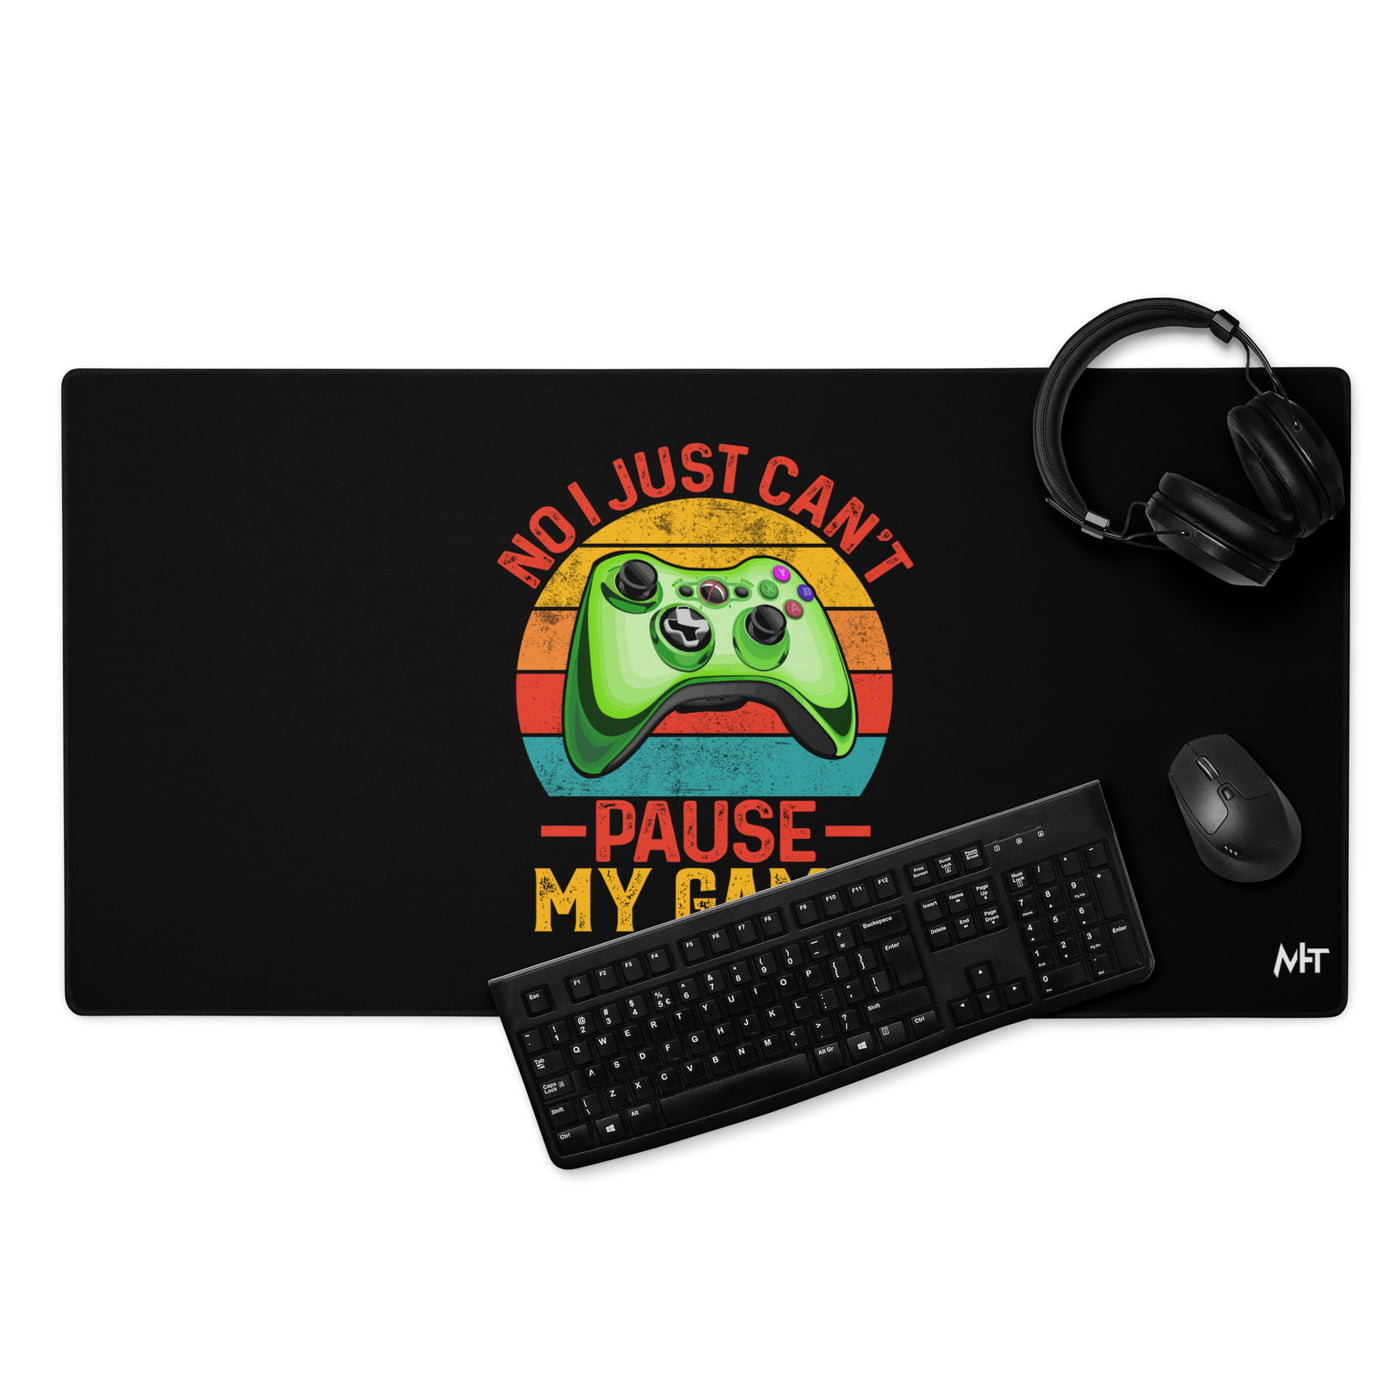 No I just can't Pause My Game Desk  Mat